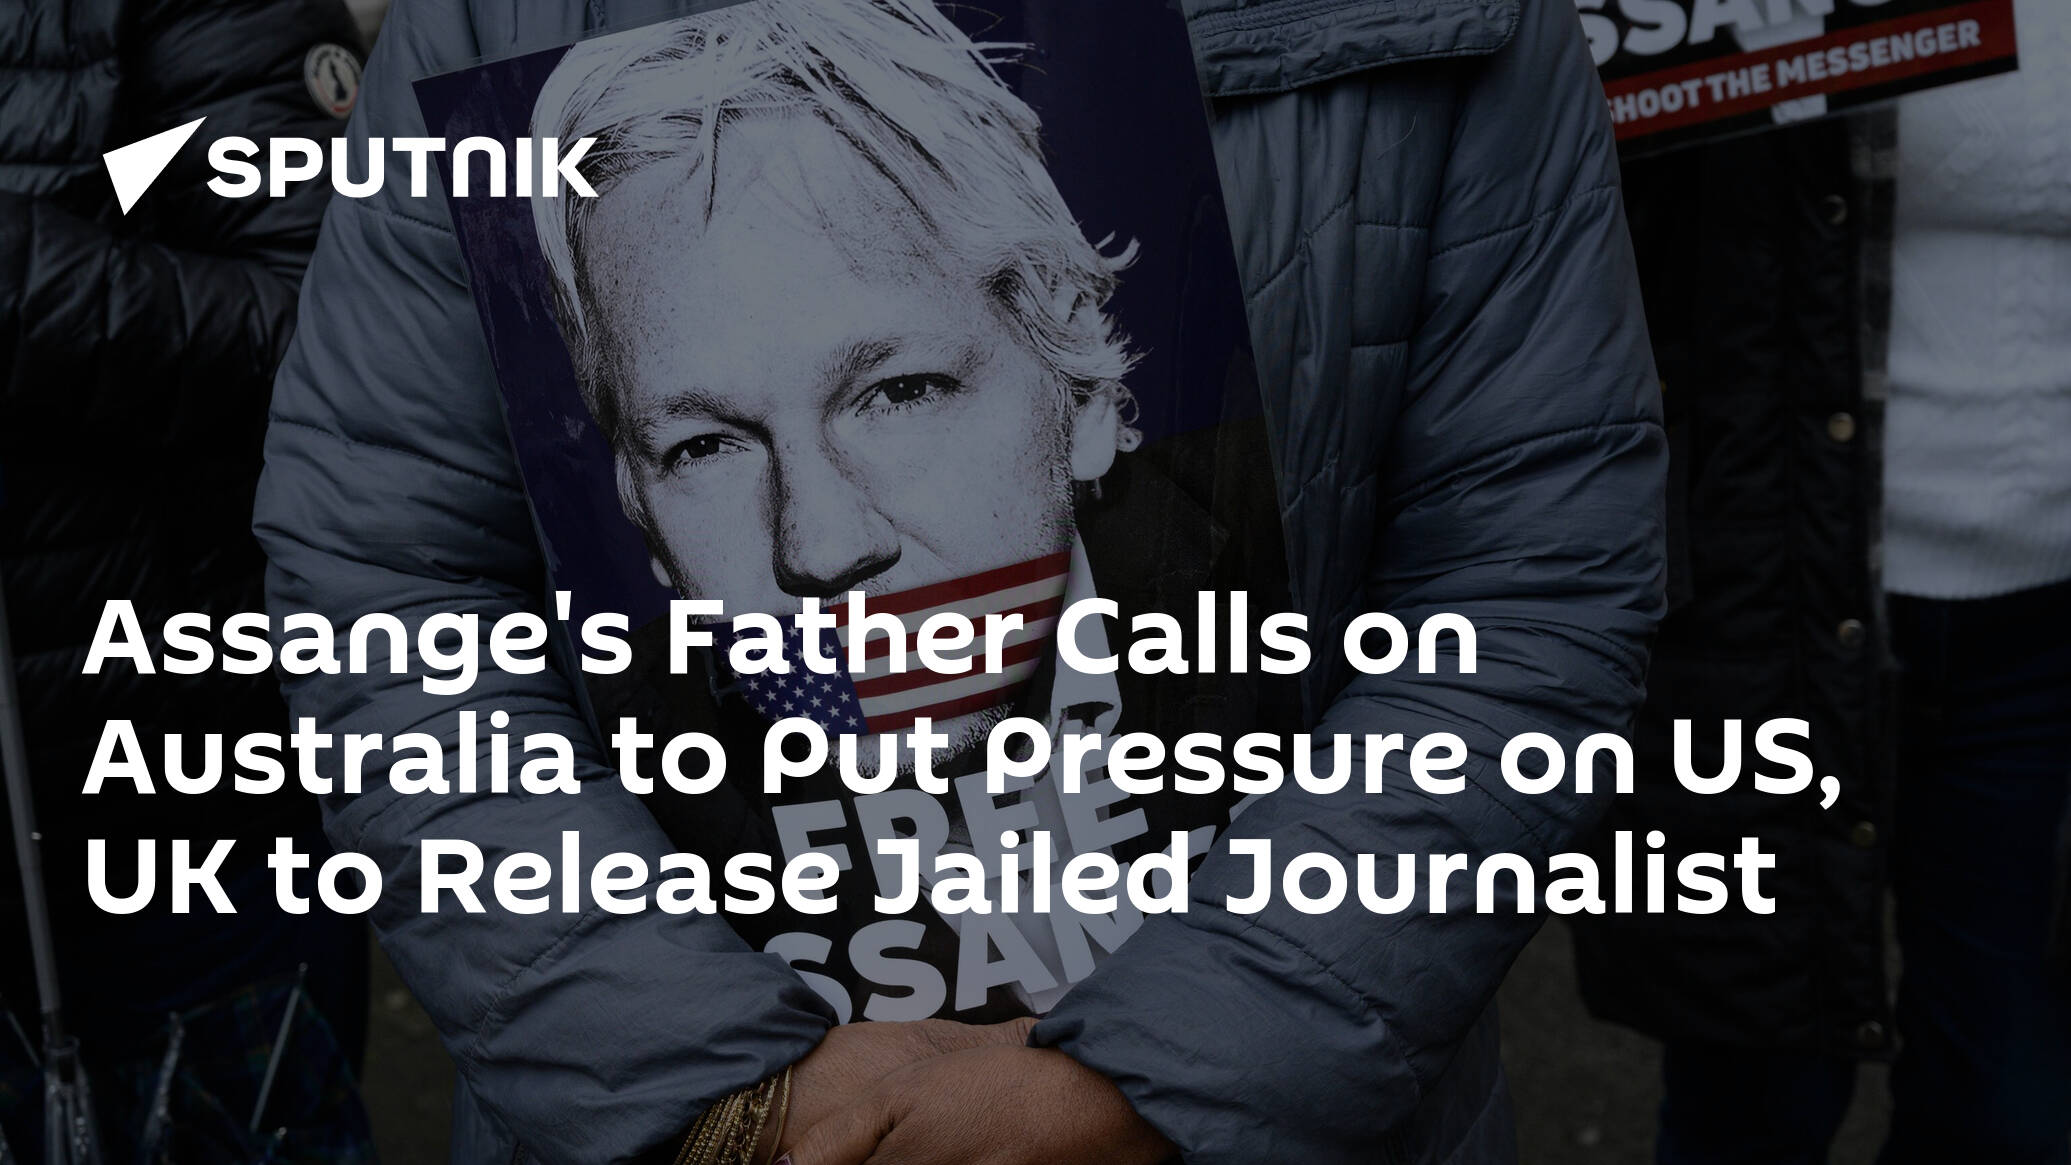 Assange's Father Calls on Australia to Put Pressure on US, UK to Release Jailed Journalist